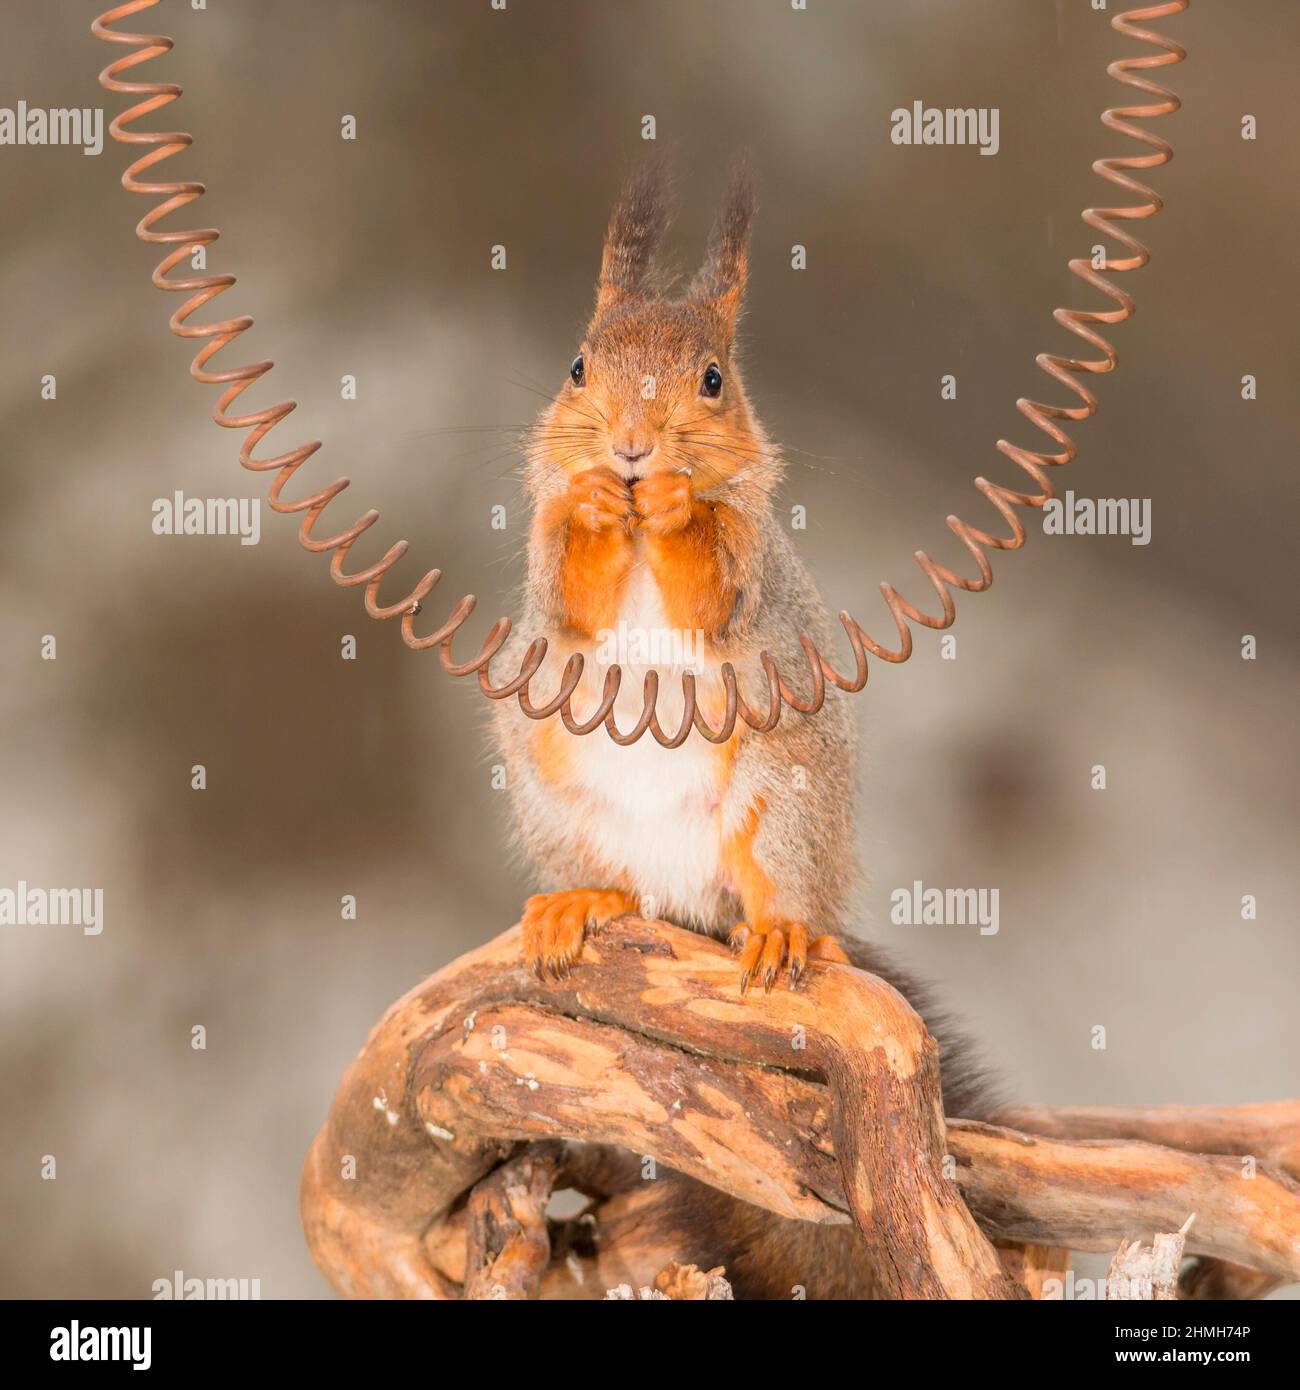 red squirrel standing on wood behind a spiral looking in the camera with rain Stock Photo